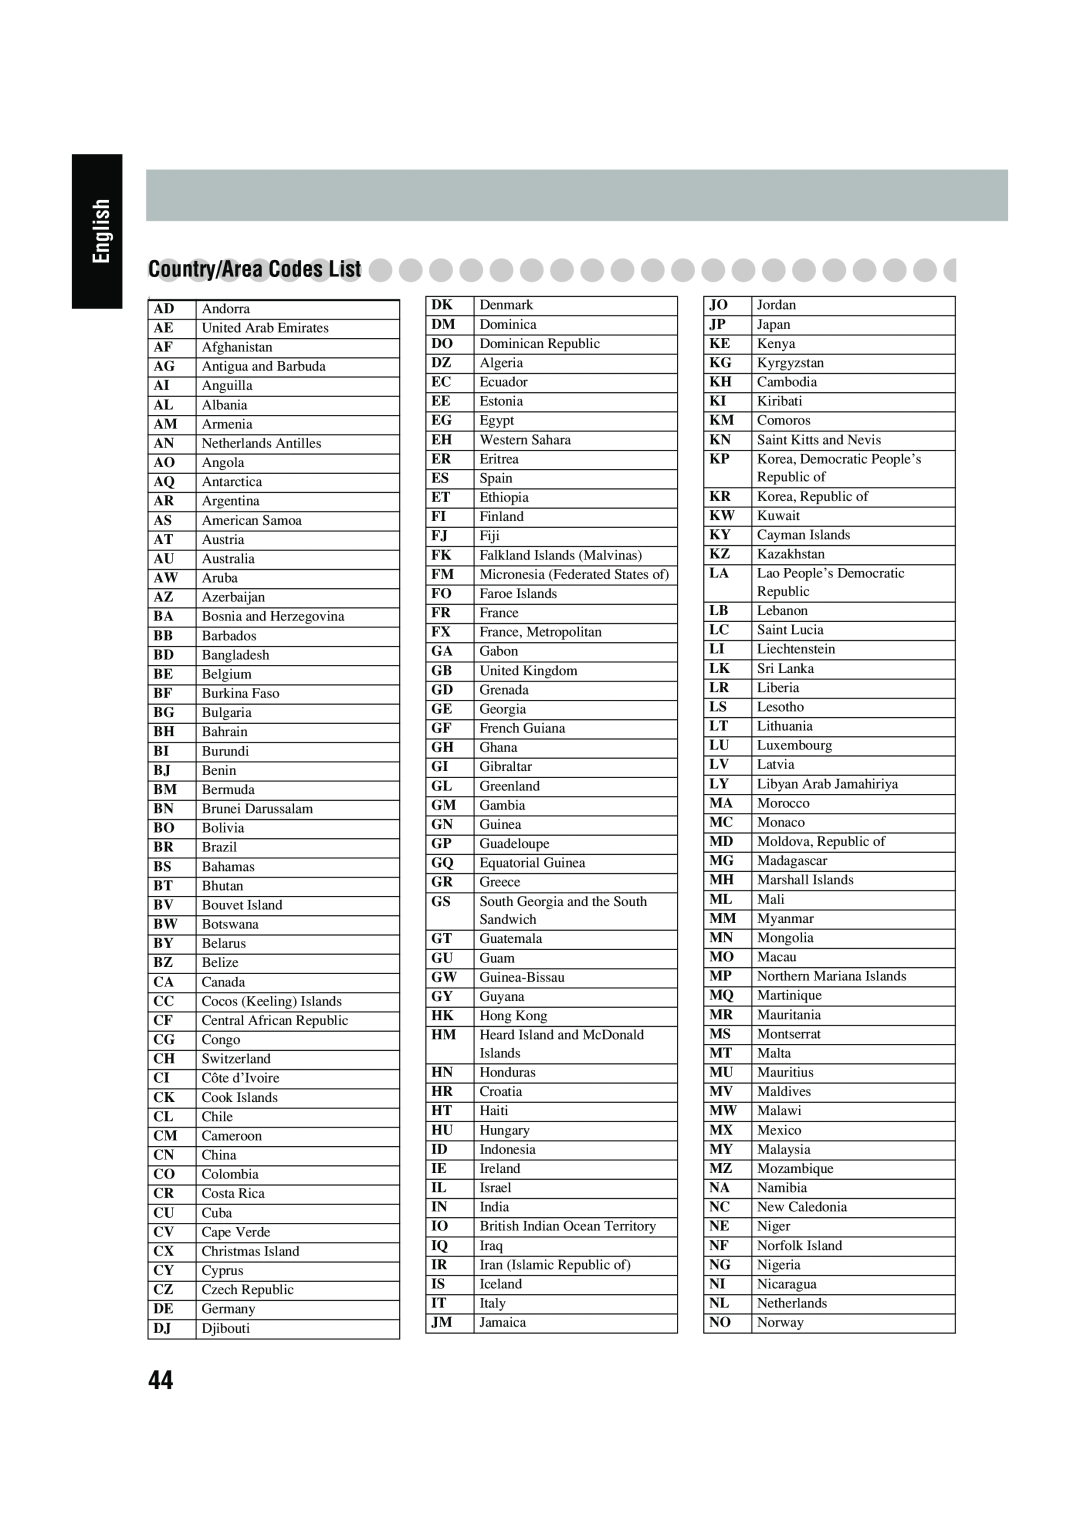 JVC UX-P450 manual English, Country/AreaCodes List 